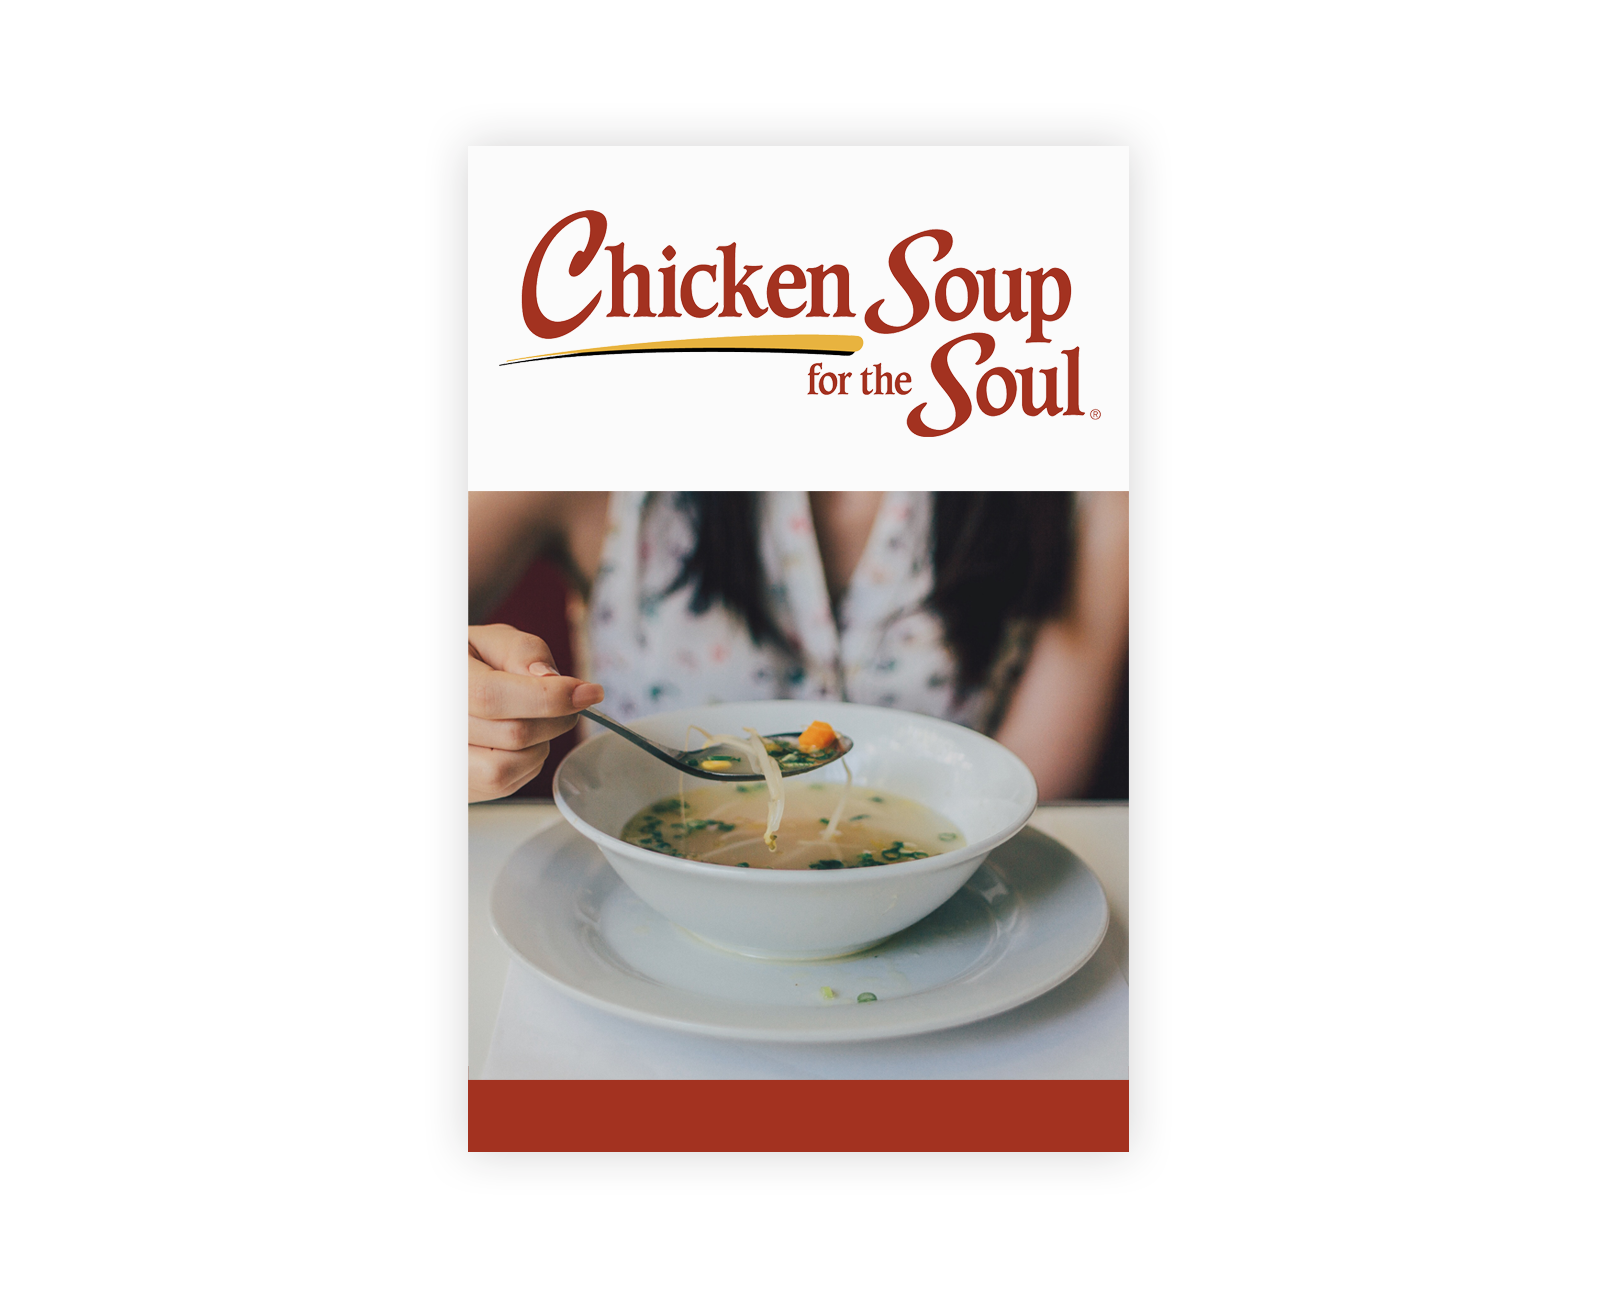 Chicken Soup for the Soul Series Book Covers